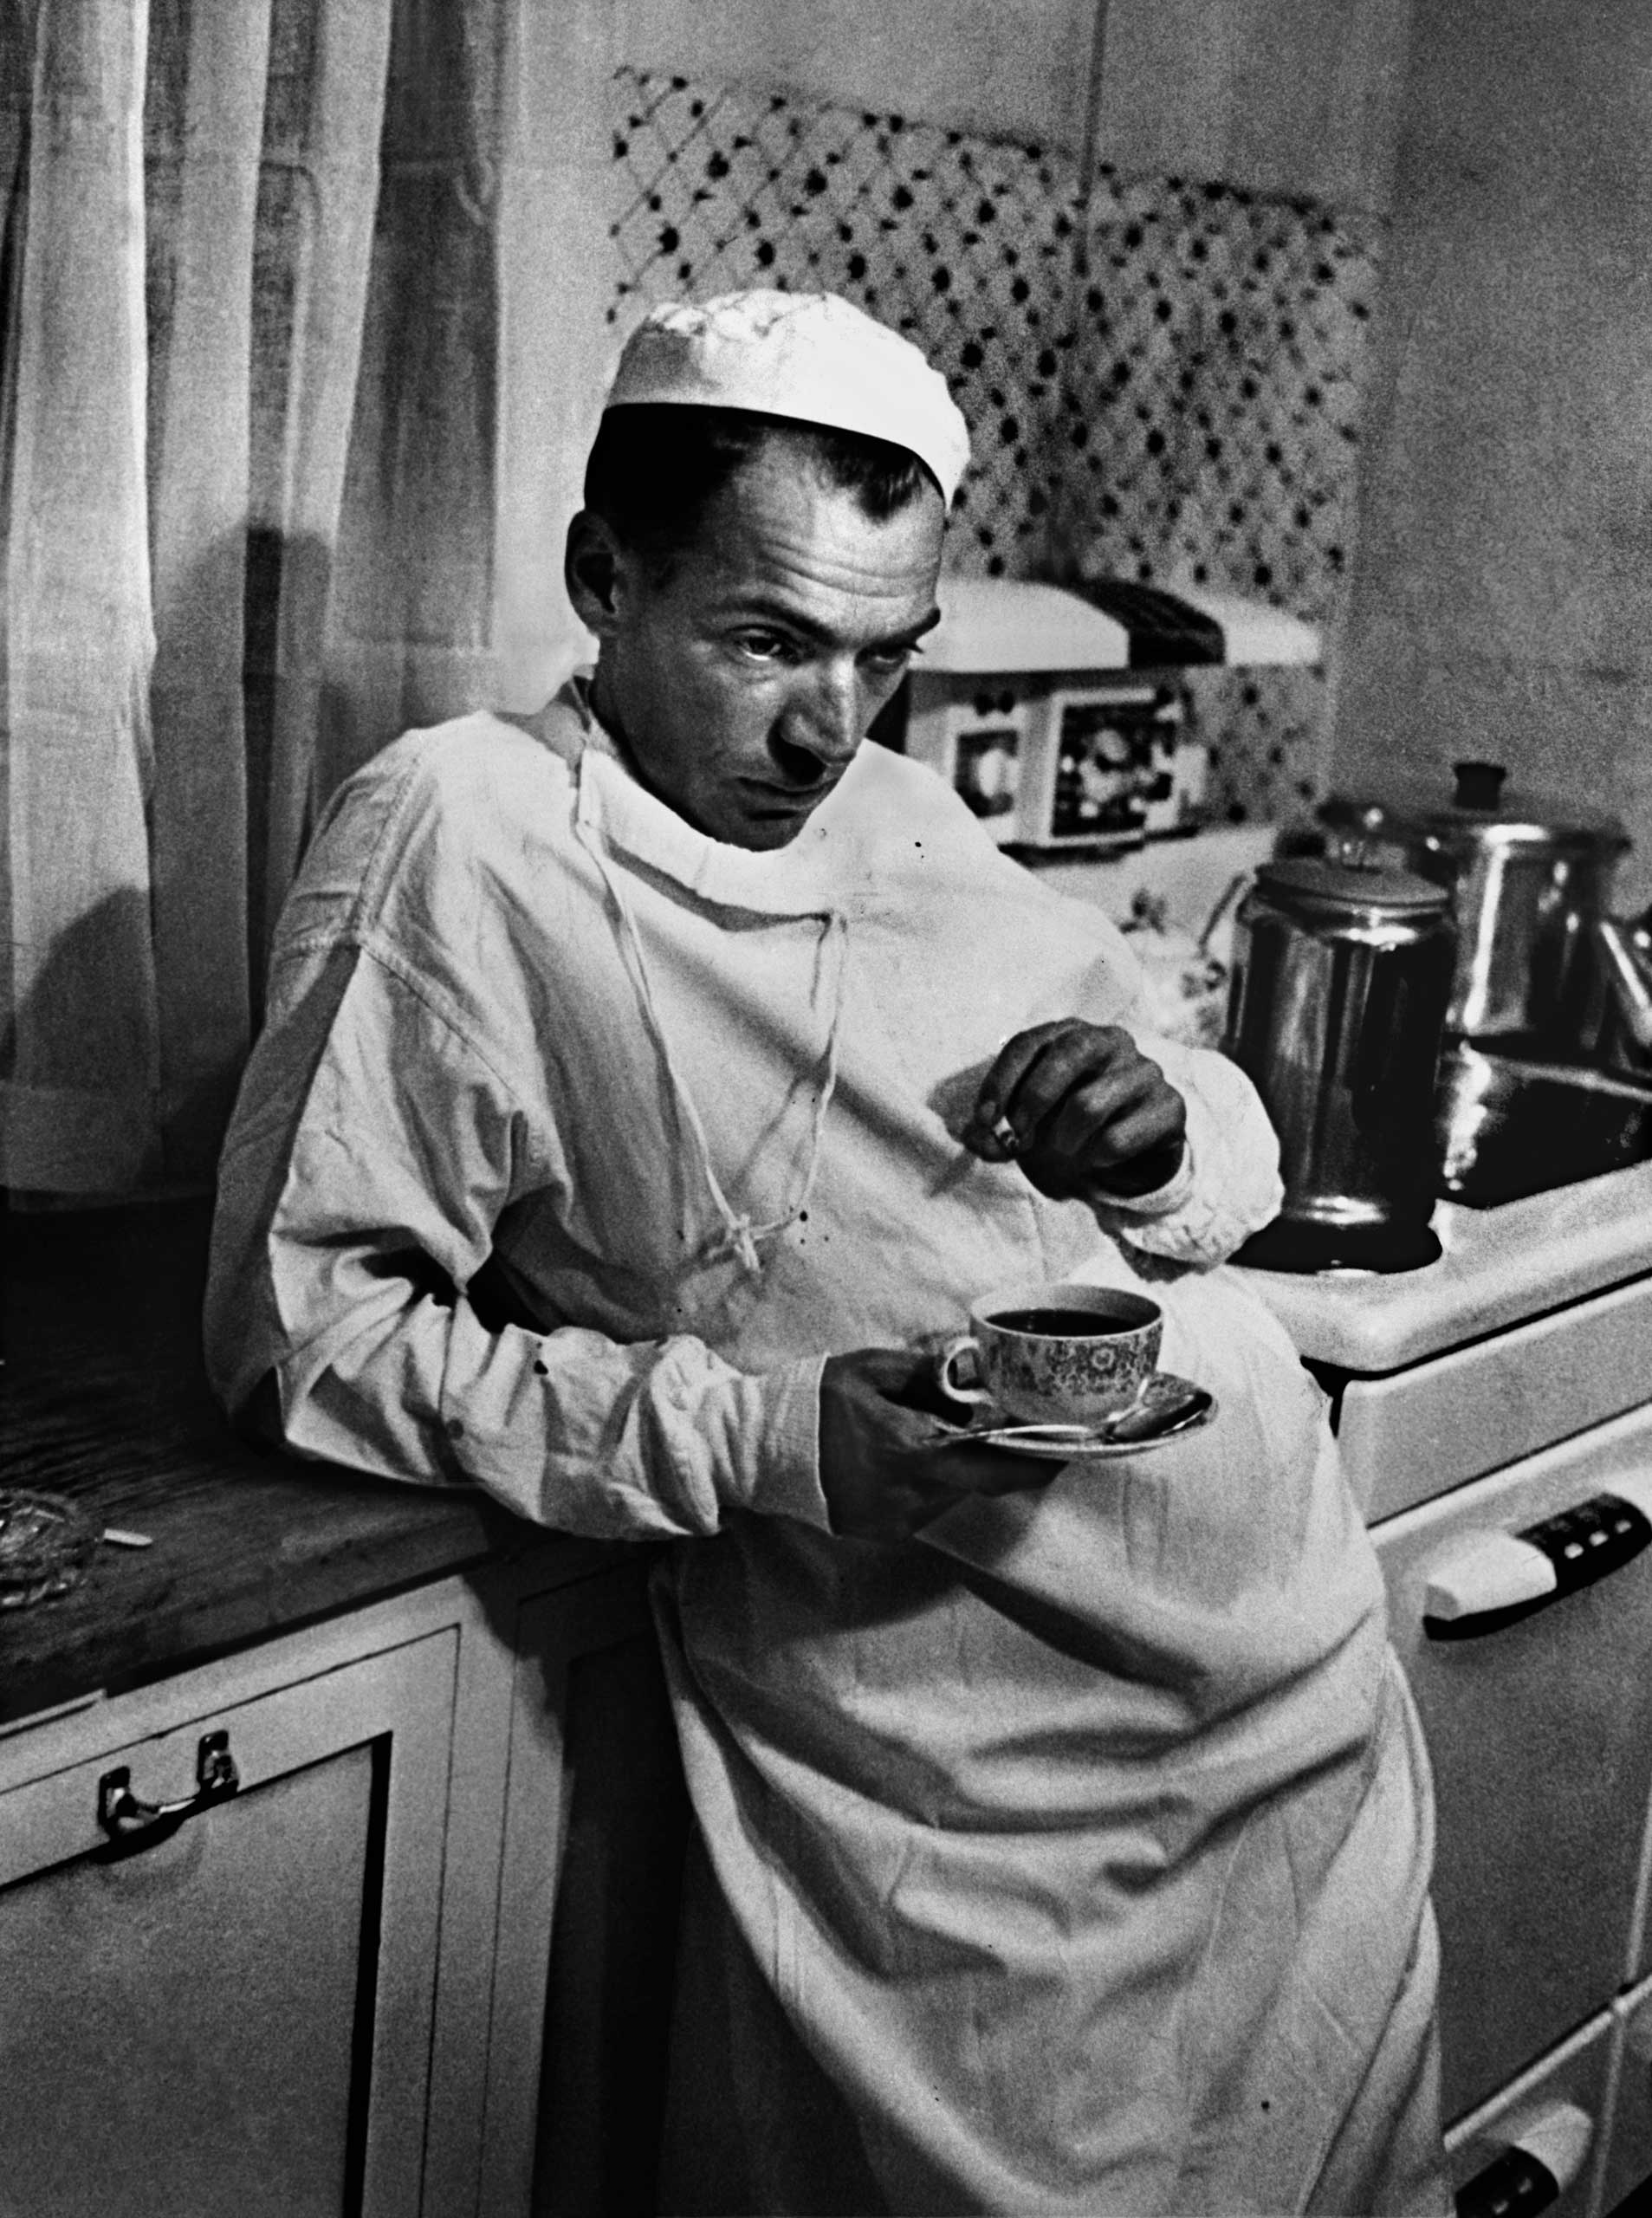 1948 | Dr. Ernest Ceriani, a general practitioner in tiny Kremmling, Colorado, stands in the town's hospital kitchen after a surgery that lasted until 2 AM. This was the final image in W. Eugene Smith's groundbreaking photo essay,  Country Doctor,  originally published in the September 20, 1948, issue of LIFE.